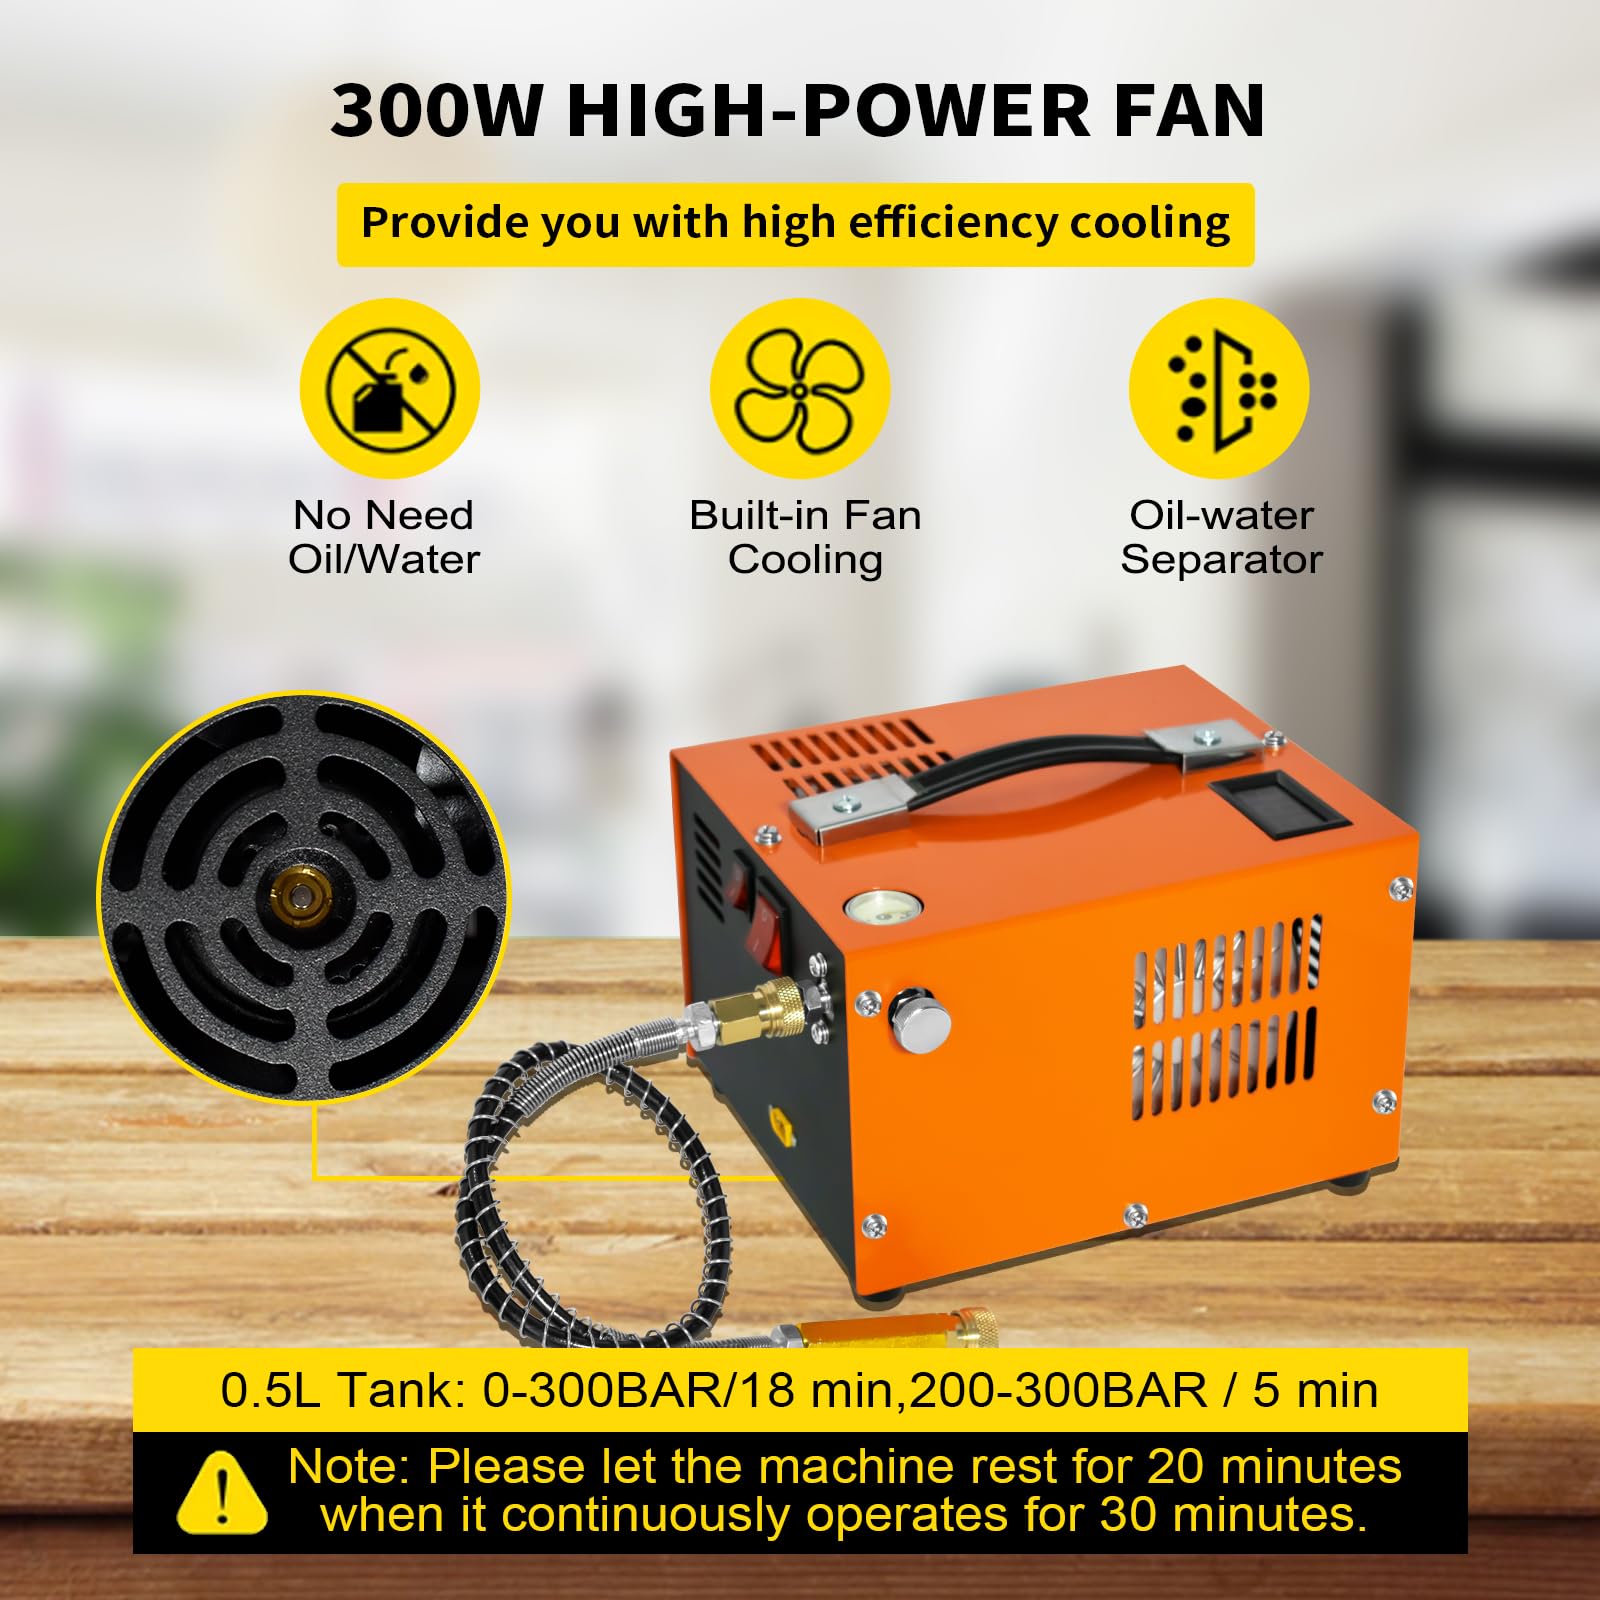 TUXING PCP Air Compressor, Portable 4500Psi/30Mpa, 8MM Quick-Connector Compatible for PCP Air Gun with Water/Oil Separator, Built-in Power Adapter(110V AC or 12V Car Battery)